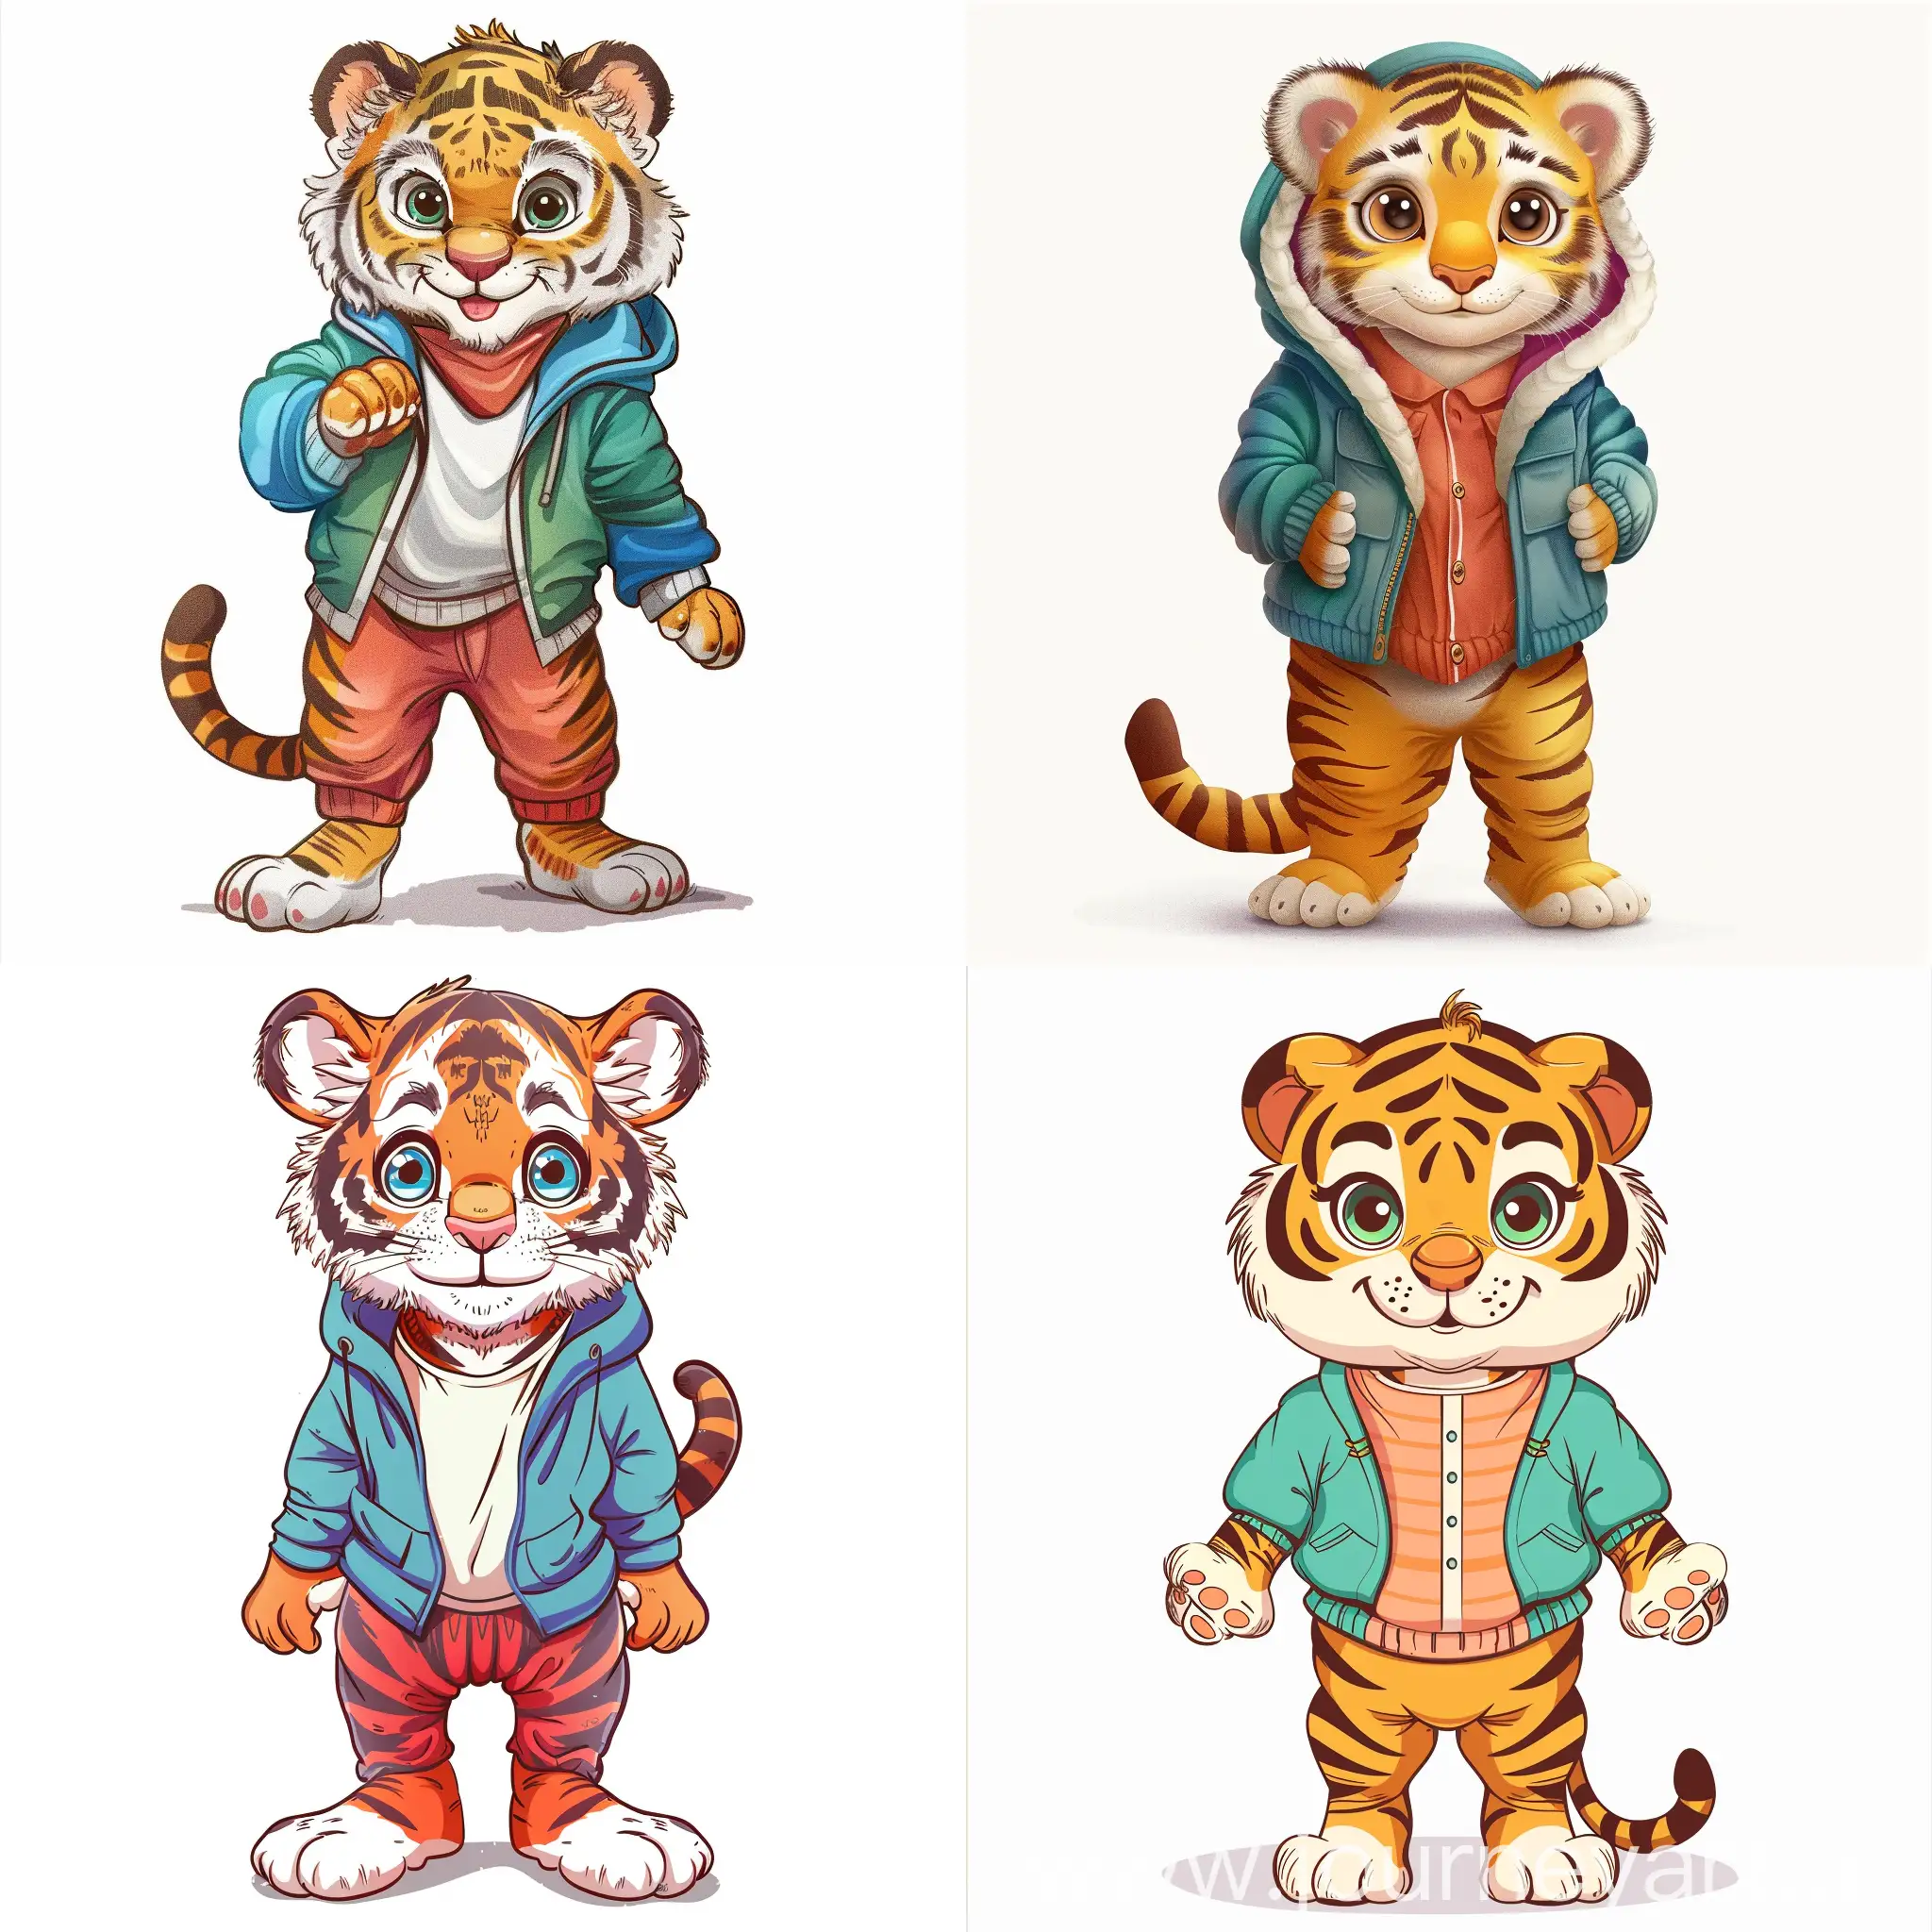 childish style, cartoon style, cute style, small detail, vector style, full-length anthropomorphic baby tiger standing on his hind legs in colored clothes,big eyes,Friendly, front paws to the sides, front view,Children’s book illustration, white background